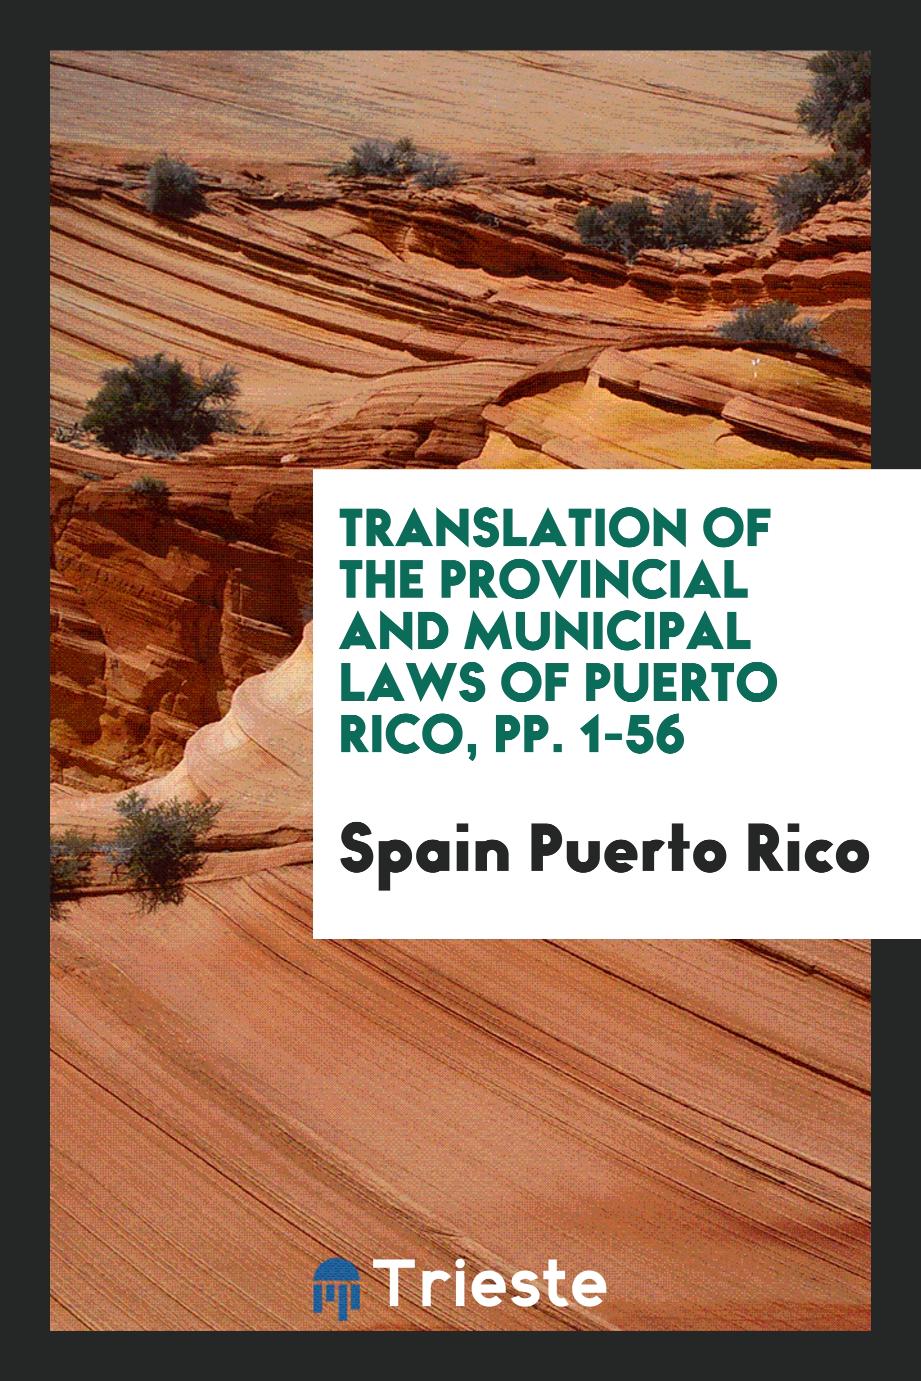 Translation of the Provincial and Municipal Laws of Puerto Rico, pp. 1-56